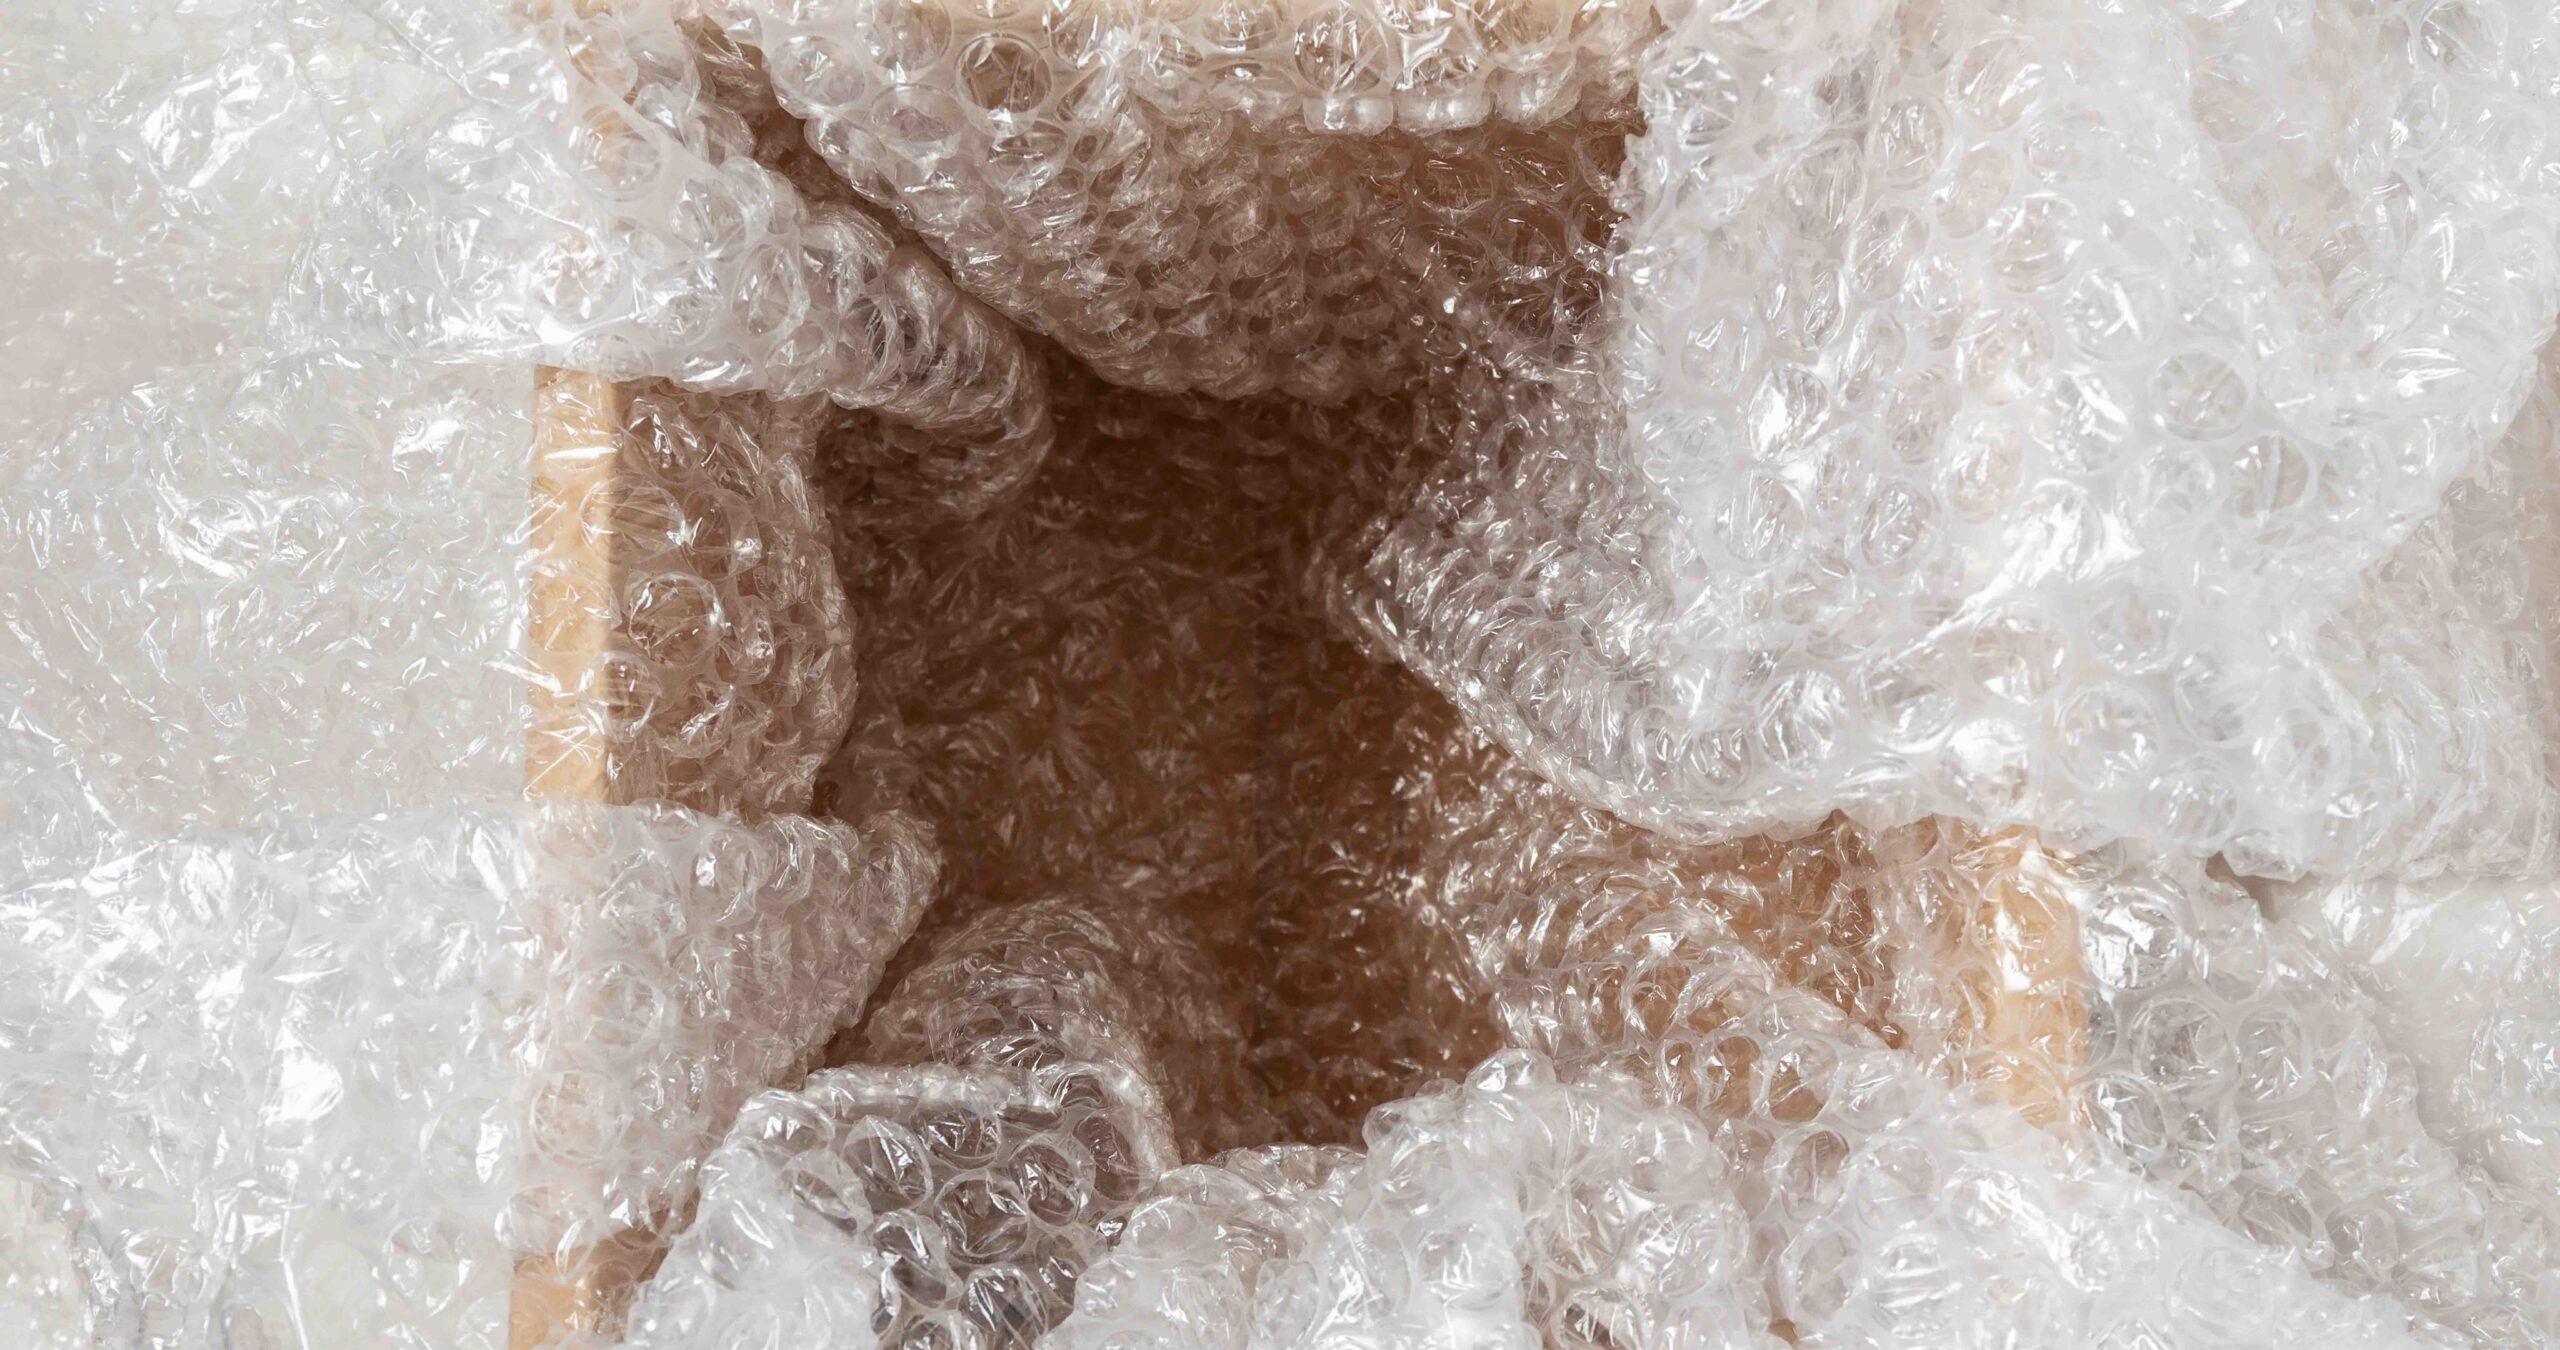 Layering Ornaments in Boxes With Bubble Wrap